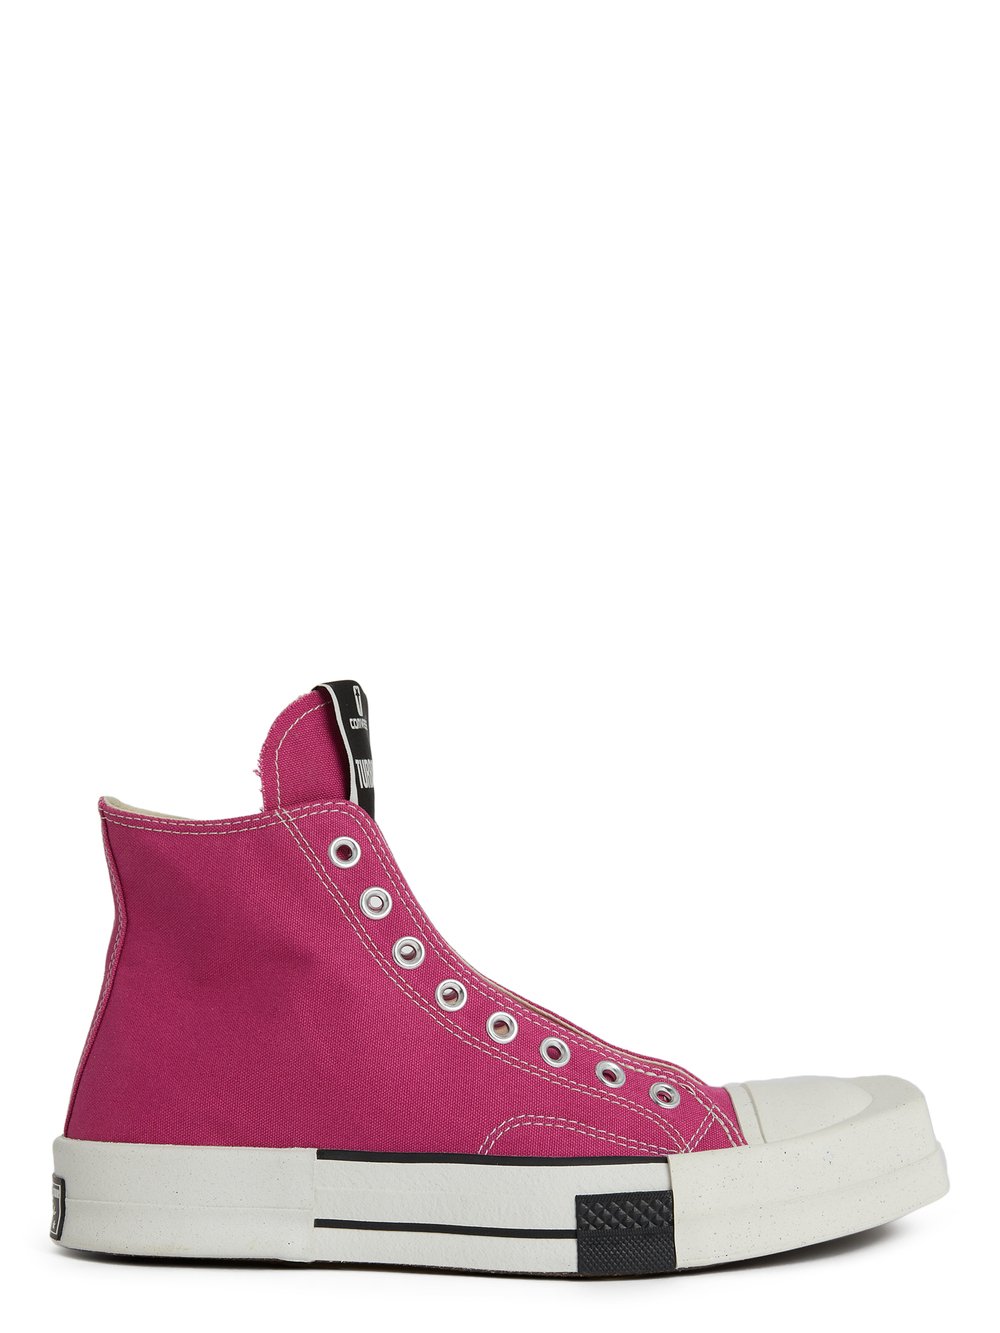 CONVERSE X DRKSHDW TURBODRK LACELESS HI IN HOT PINK AND WHITE.